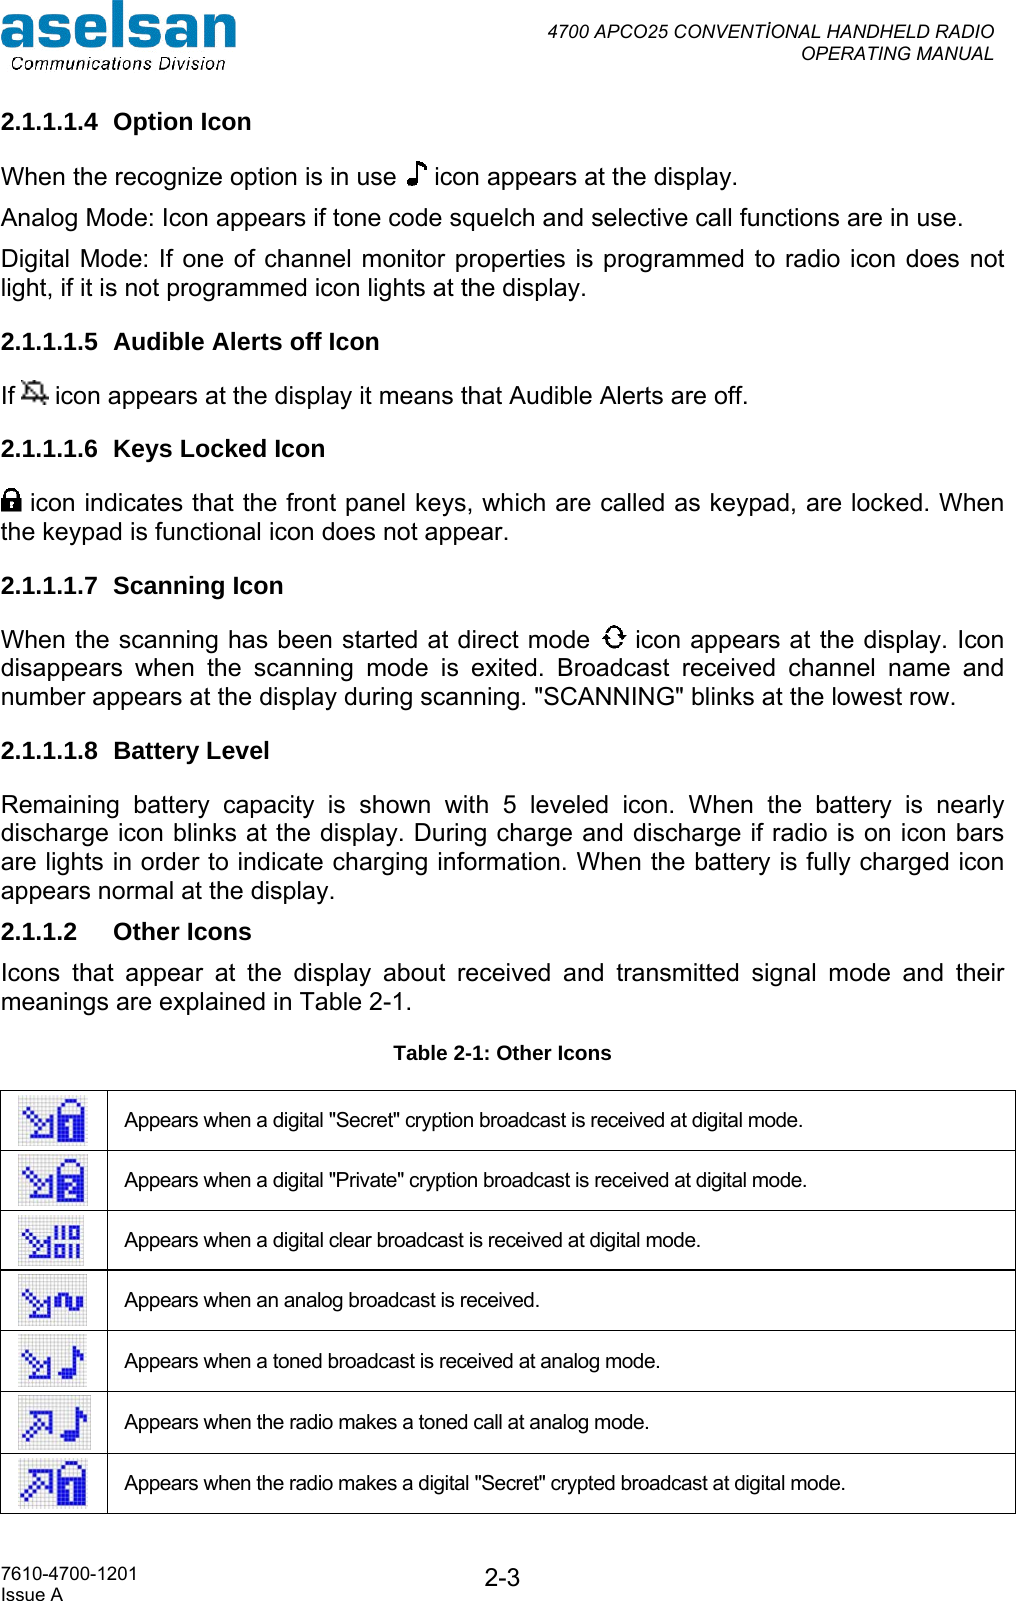  4700 APCO25 CONVENTİONAL HANDHELD RADIO  OPERATING MANUAL   7610-4700-1201 Issue A  2-32.1.1.1.4 Option Icon When the recognize option is in use   icon appears at the display. Analog Mode: Icon appears if tone code squelch and selective call functions are in use.  Digital Mode: If one of channel monitor properties is programmed to radio icon does not light, if it is not programmed icon lights at the display.  2.1.1.1.5 Audible Alerts off Icon If   icon appears at the display it means that Audible Alerts are off. 2.1.1.1.6  Keys Locked Icon  icon indicates that the front panel keys, which are called as keypad, are locked. When the keypad is functional icon does not appear.  2.1.1.1.7 Scanning Icon When the scanning has been started at direct mode   icon appears at the display. Icon disappears when the scanning mode is exited. Broadcast received channel name and number appears at the display during scanning. &quot;SCANNING&quot; blinks at the lowest row. 2.1.1.1.8 Battery Level Remaining battery capacity is shown with 5 leveled icon. When the battery is nearly discharge icon blinks at the display. During charge and discharge if radio is on icon bars are lights in order to indicate charging information. When the battery is fully charged icon appears normal at the display. 2.1.1.2 Other Icons Icons that appear at the display about received and transmitted signal mode and their meanings are explained in Table 2-1. Table 2-1: Other Icons  Appears when a digital &quot;Secret&quot; cryption broadcast is received at digital mode.  Appears when a digital &quot;Private&quot; cryption broadcast is received at digital mode.  Appears when a digital clear broadcast is received at digital mode.  Appears when an analog broadcast is received.  Appears when a toned broadcast is received at analog mode.  Appears when the radio makes a toned call at analog mode.  Appears when the radio makes a digital &quot;Secret&quot; crypted broadcast at digital mode. 